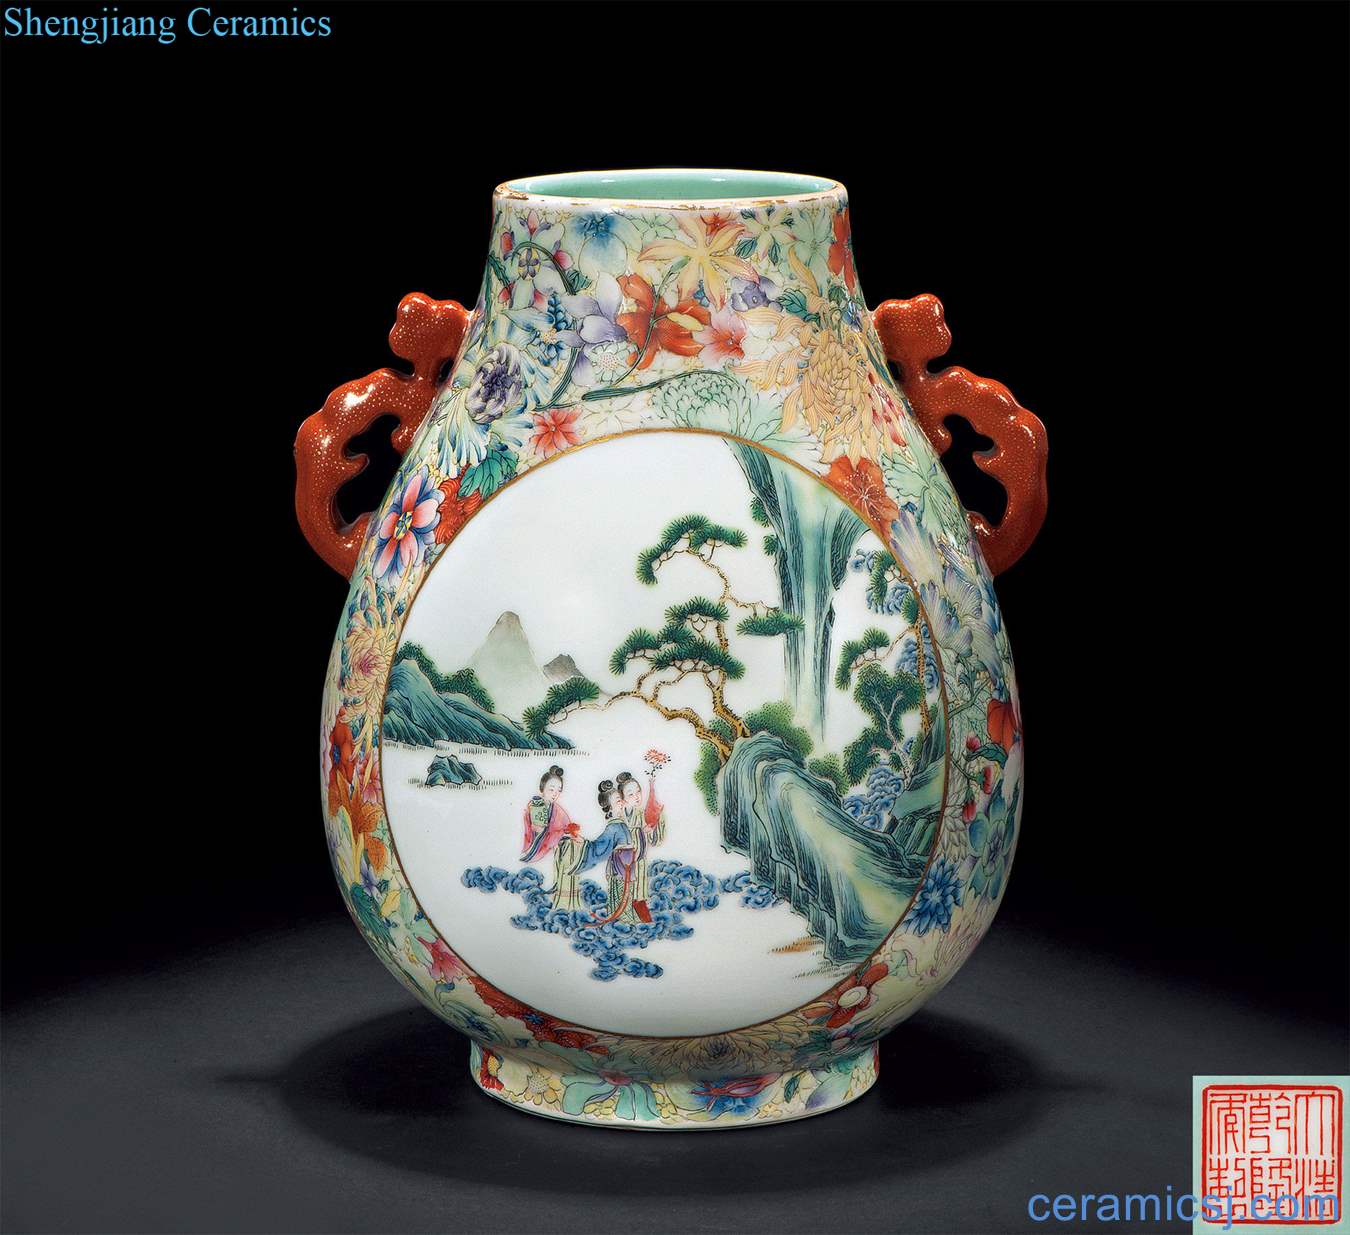 Pastel reign of qing emperor guangxu medallion flowers don't open medallion offer longevity figure double therefore ear